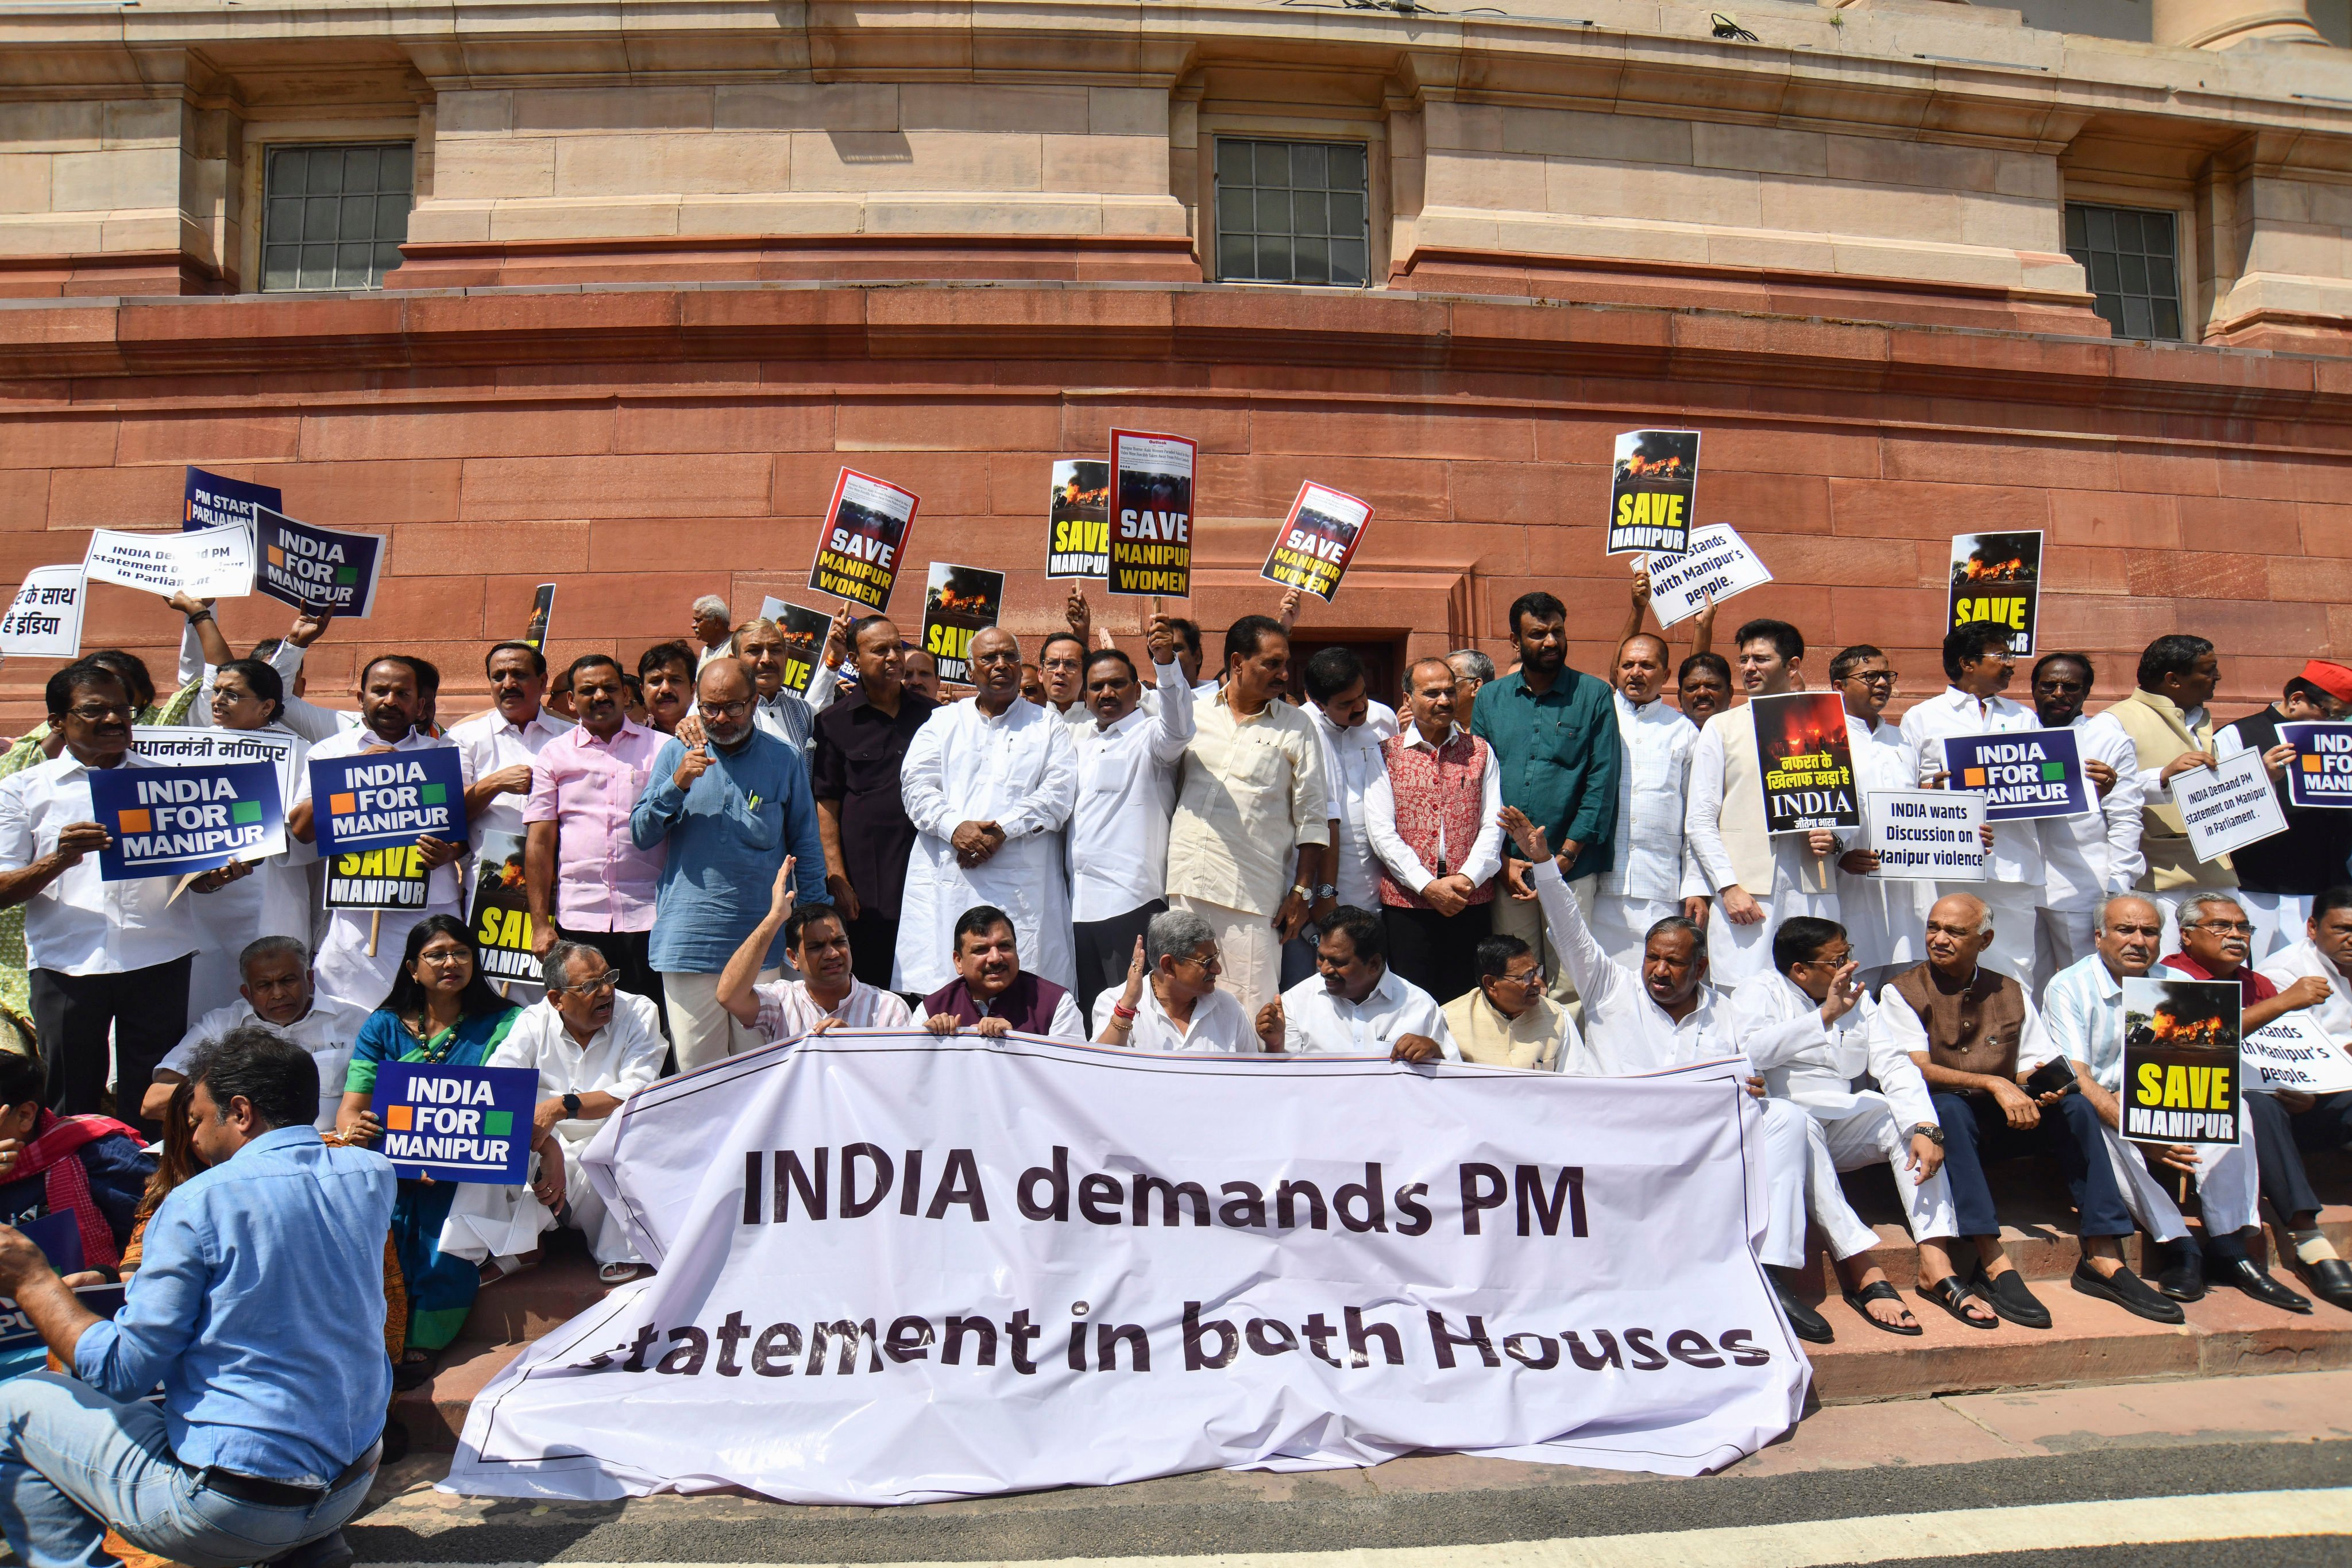 Opposition lawmakers demanding a statement from Prime Minister Narendra Modi on the violence in Manipur state outside the Parliament building in New Delhi, on July 24, 2023. Photo: AP